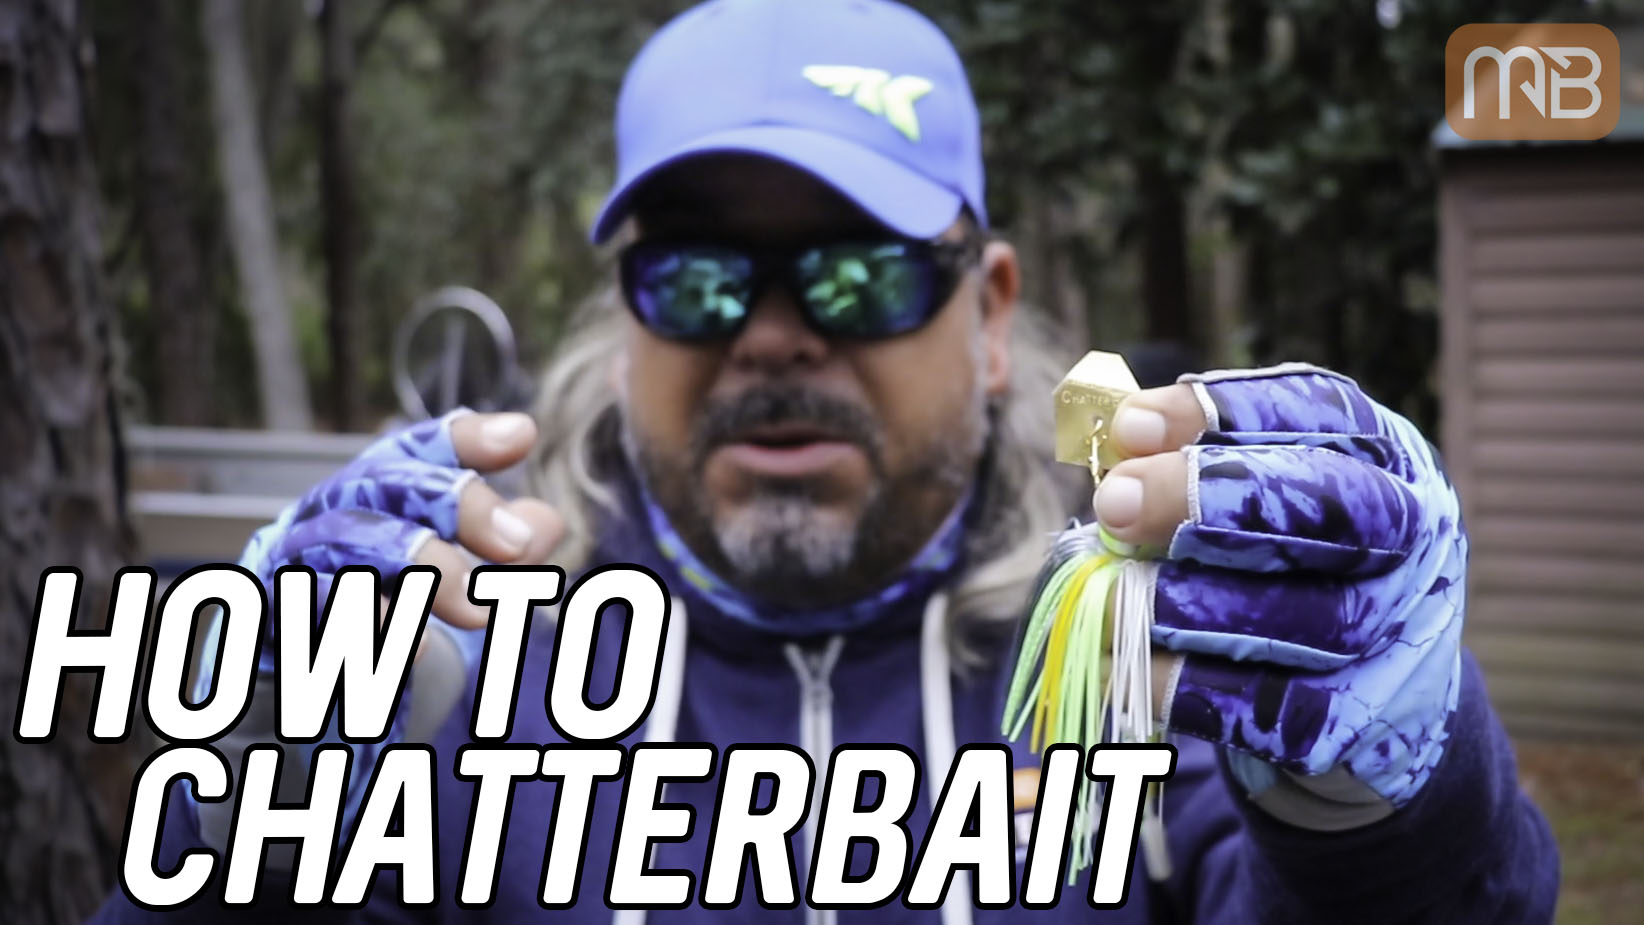 How to Fish a Chatterbait (Tips and Tricks for Bigger Bass)
– MONSTERBASS
